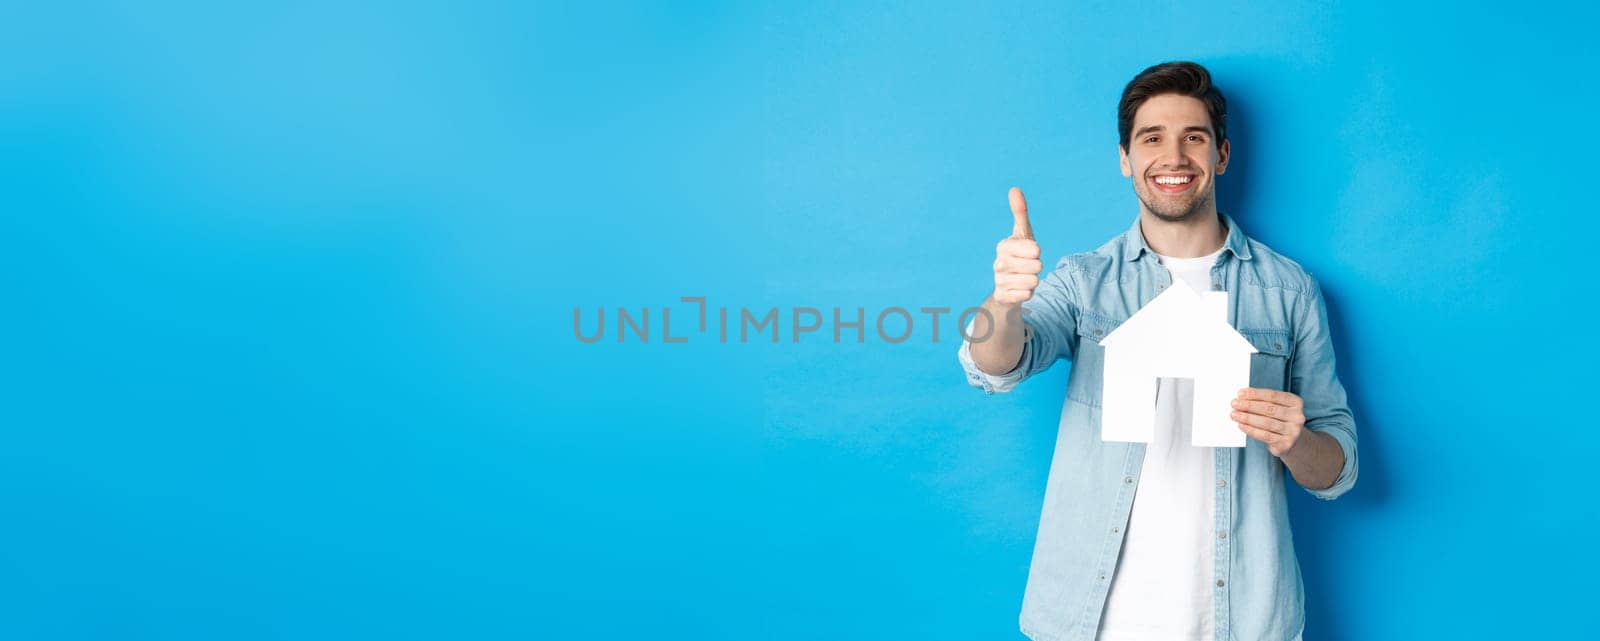 Insurance, mortgage and real estate concept. Satisfied client showing house model and thumb up, smiling pleased, standing against blue background.